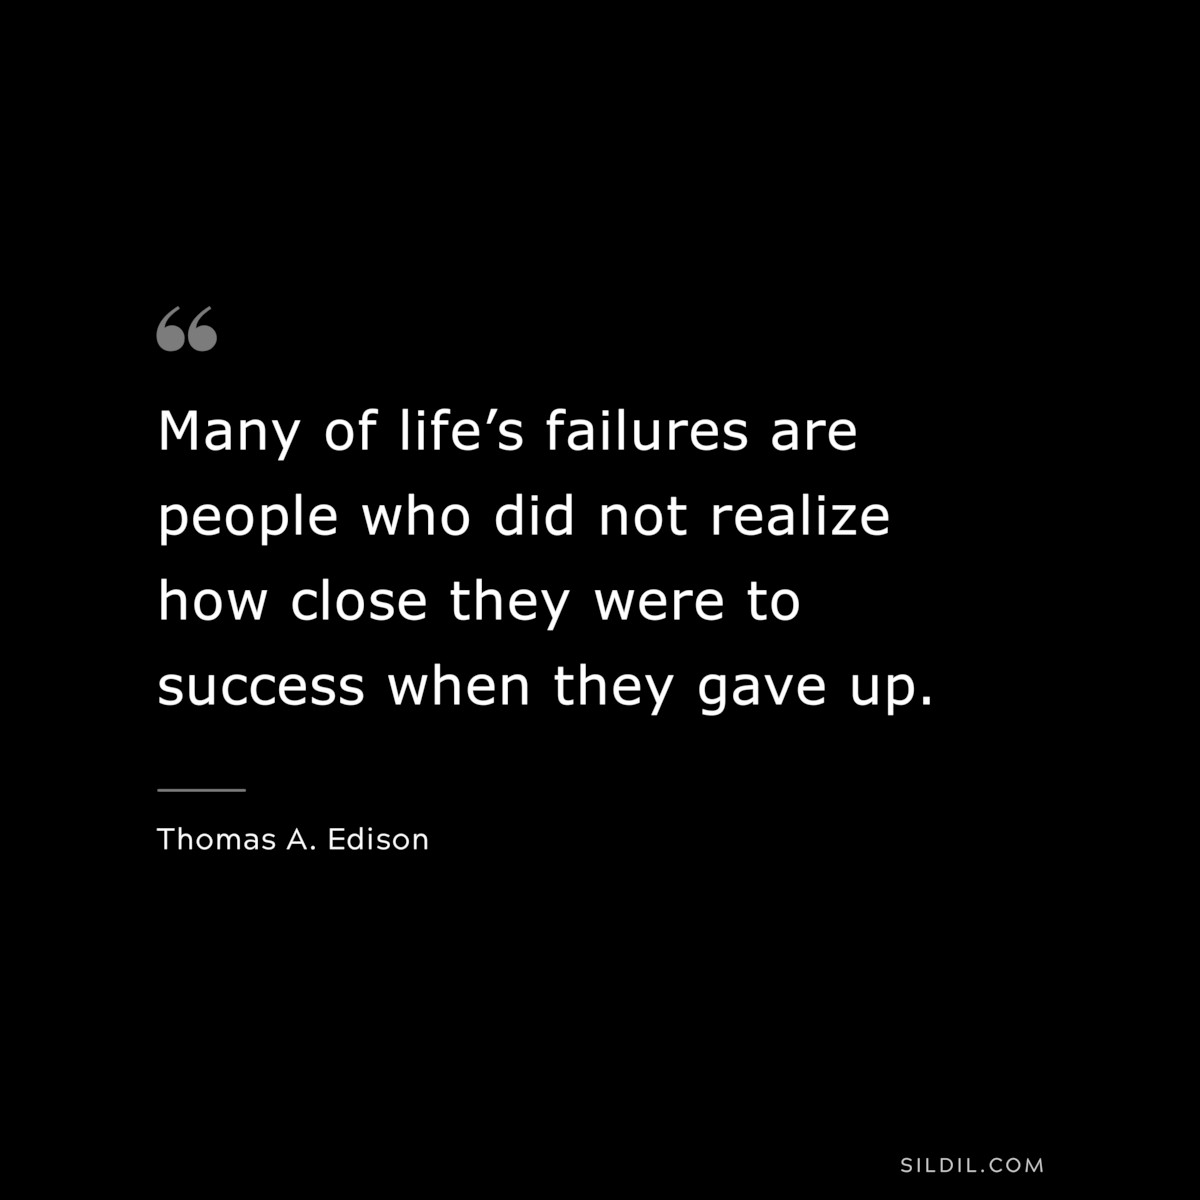 Many of life’s failures are people who did not realize how close they were to success when they gave up. ― Thomas A. Edison